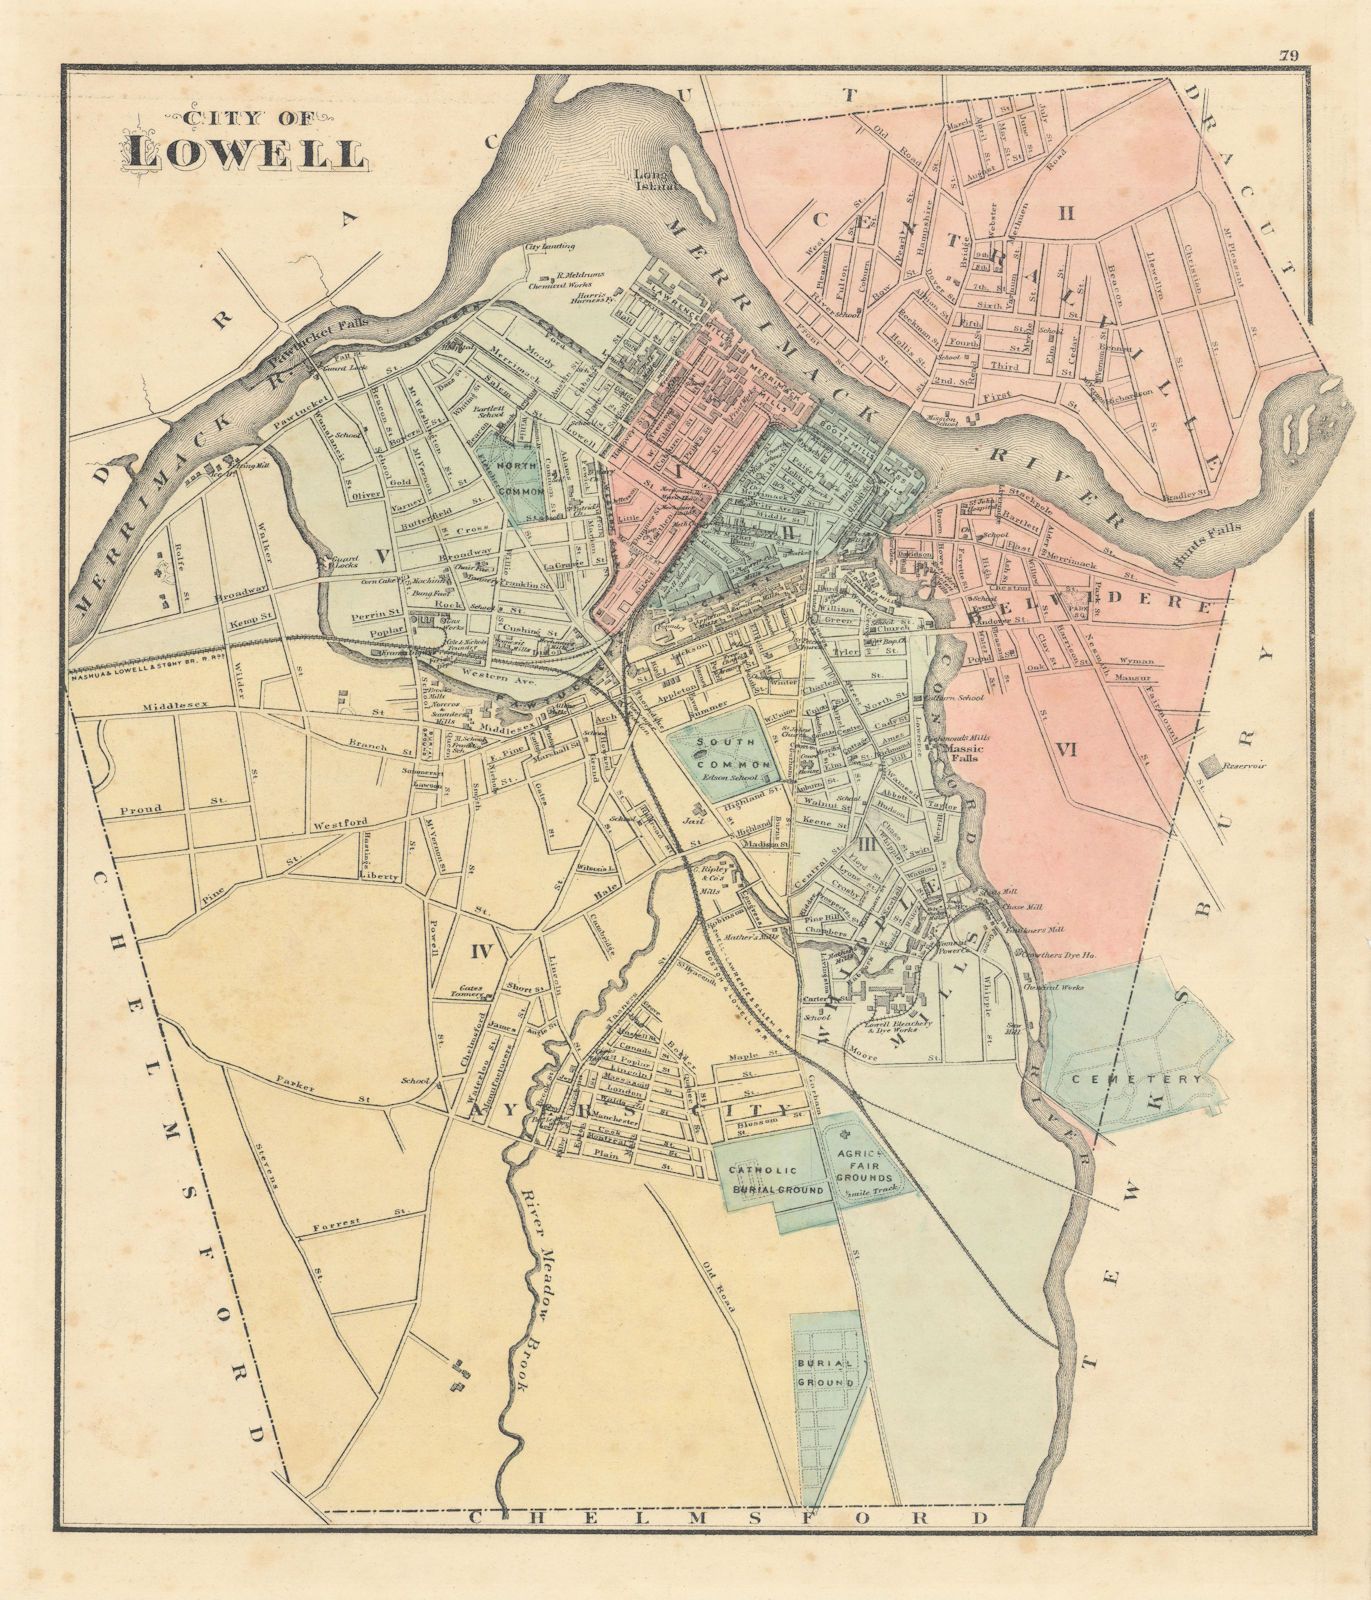 Associate Product City of Lowell, Massachusetts. Town plan. BAKER, WALLING & GRAY 1871 old map